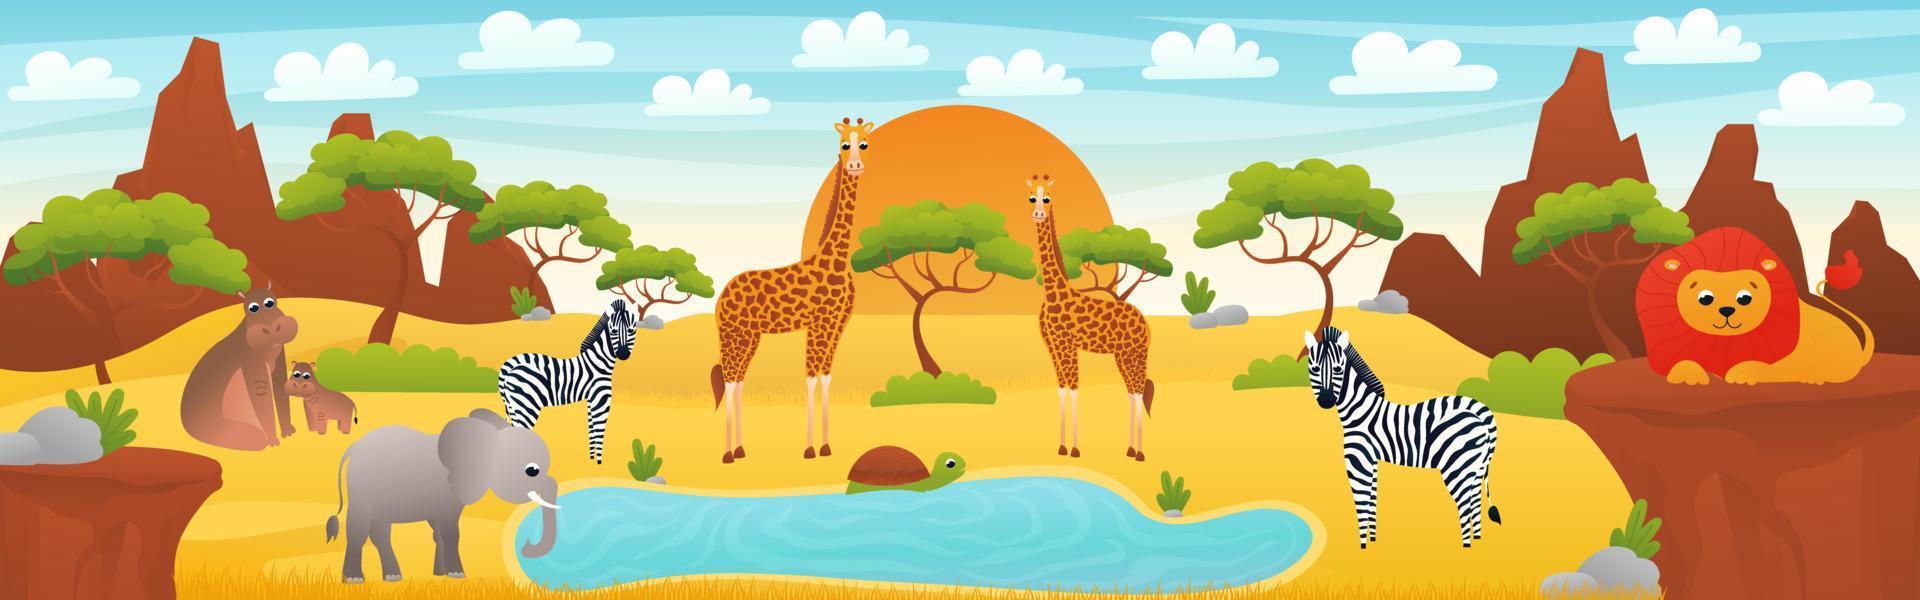 African landscape with cute cartoon animals - elephant, zebra and lion, web banner with savannah scene, african desert exploration, zoo horizontal poster for print vector